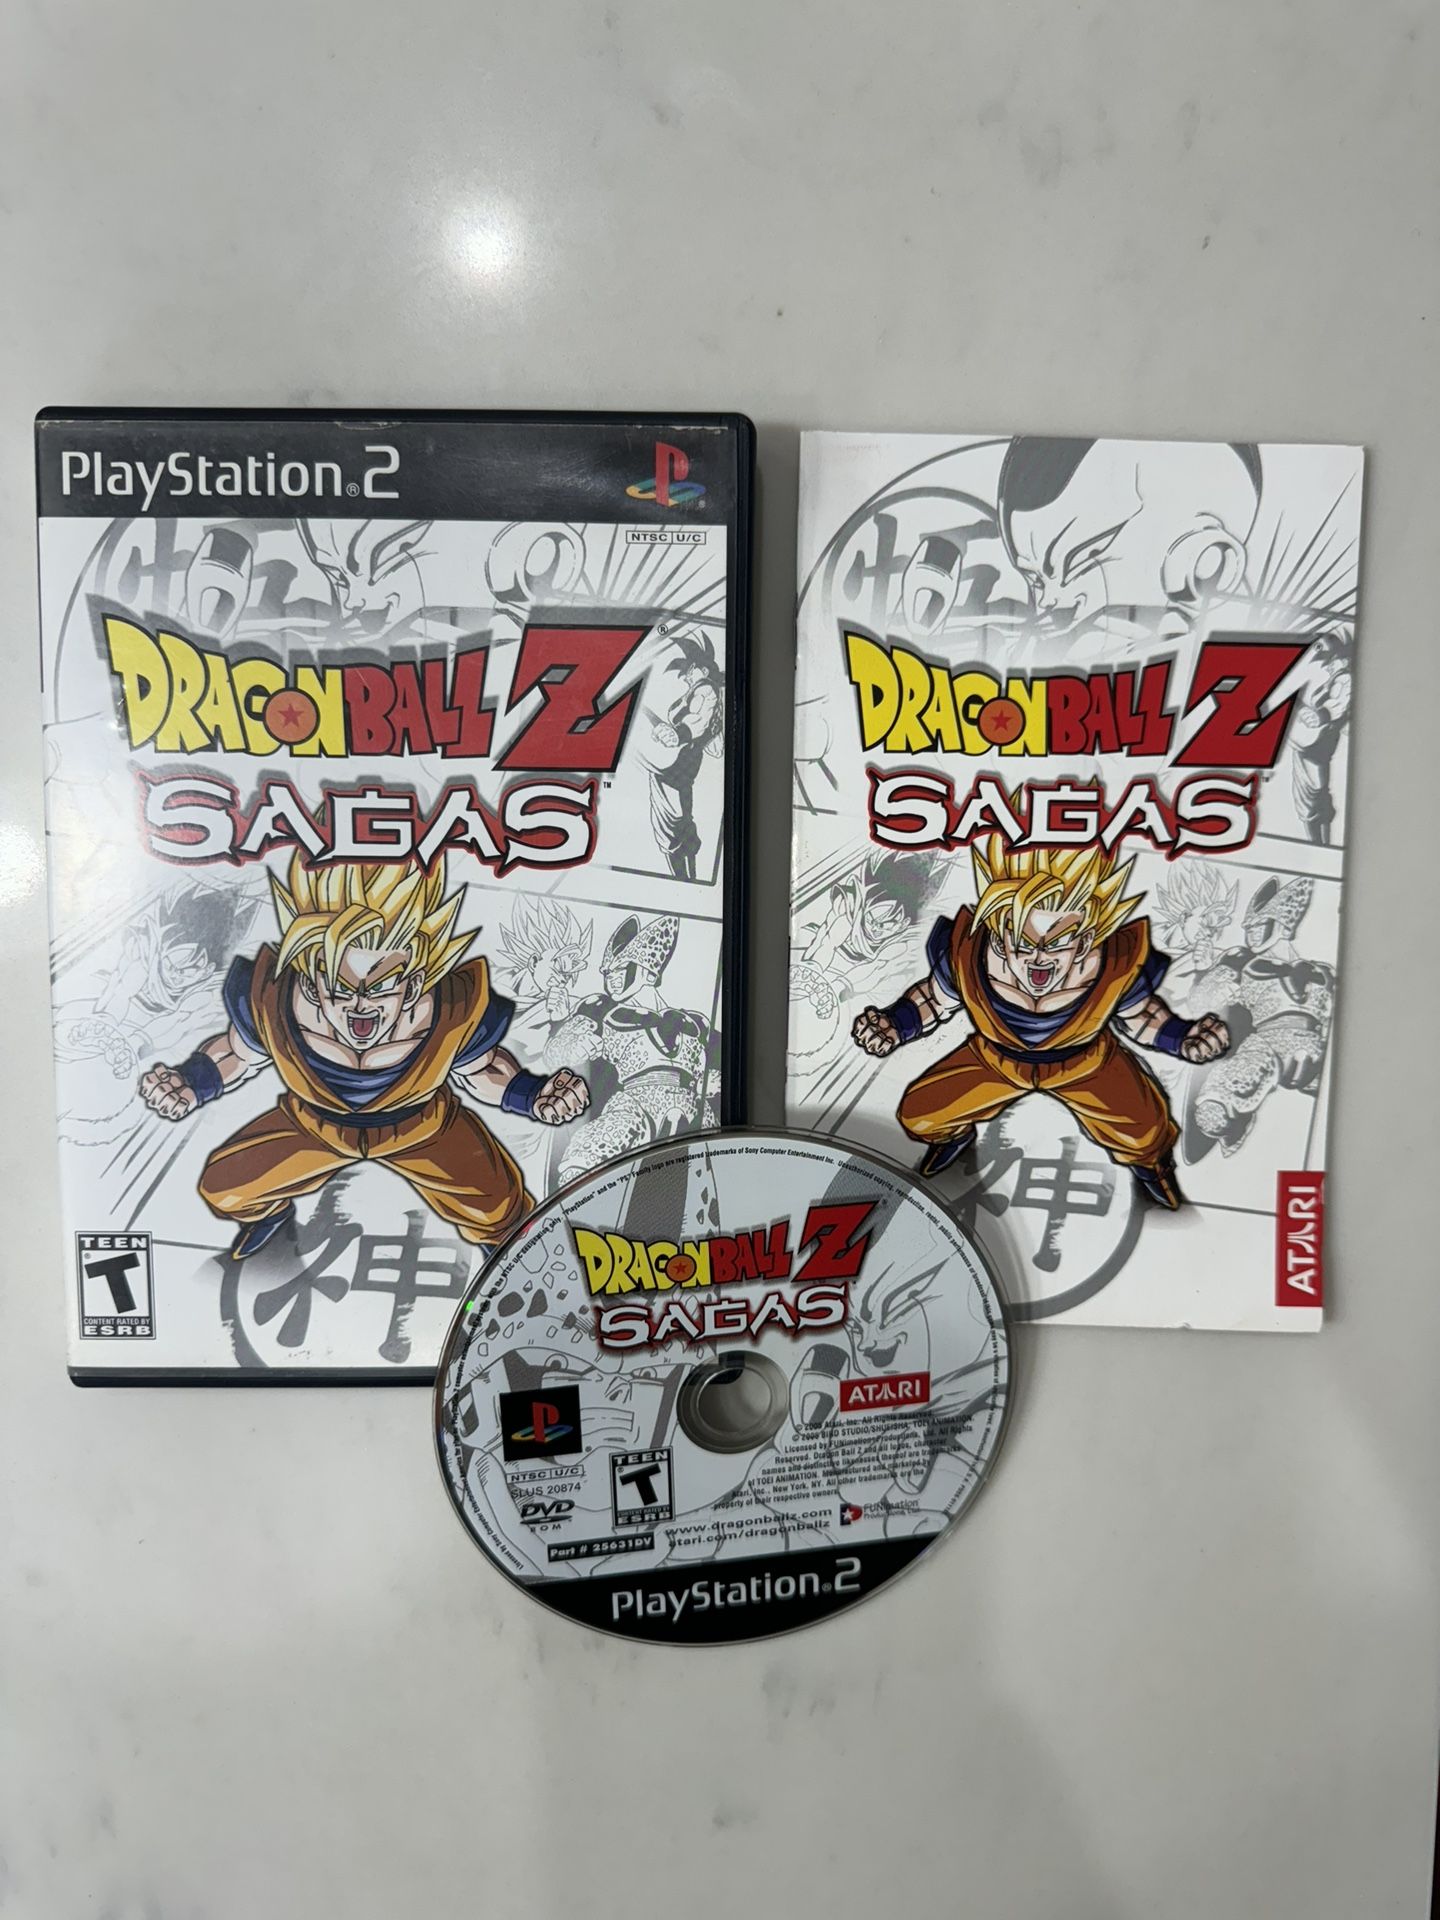 Dragon Ball Z Sagas Scratch-Less Disc for PlayStation 2 PS2 GAME